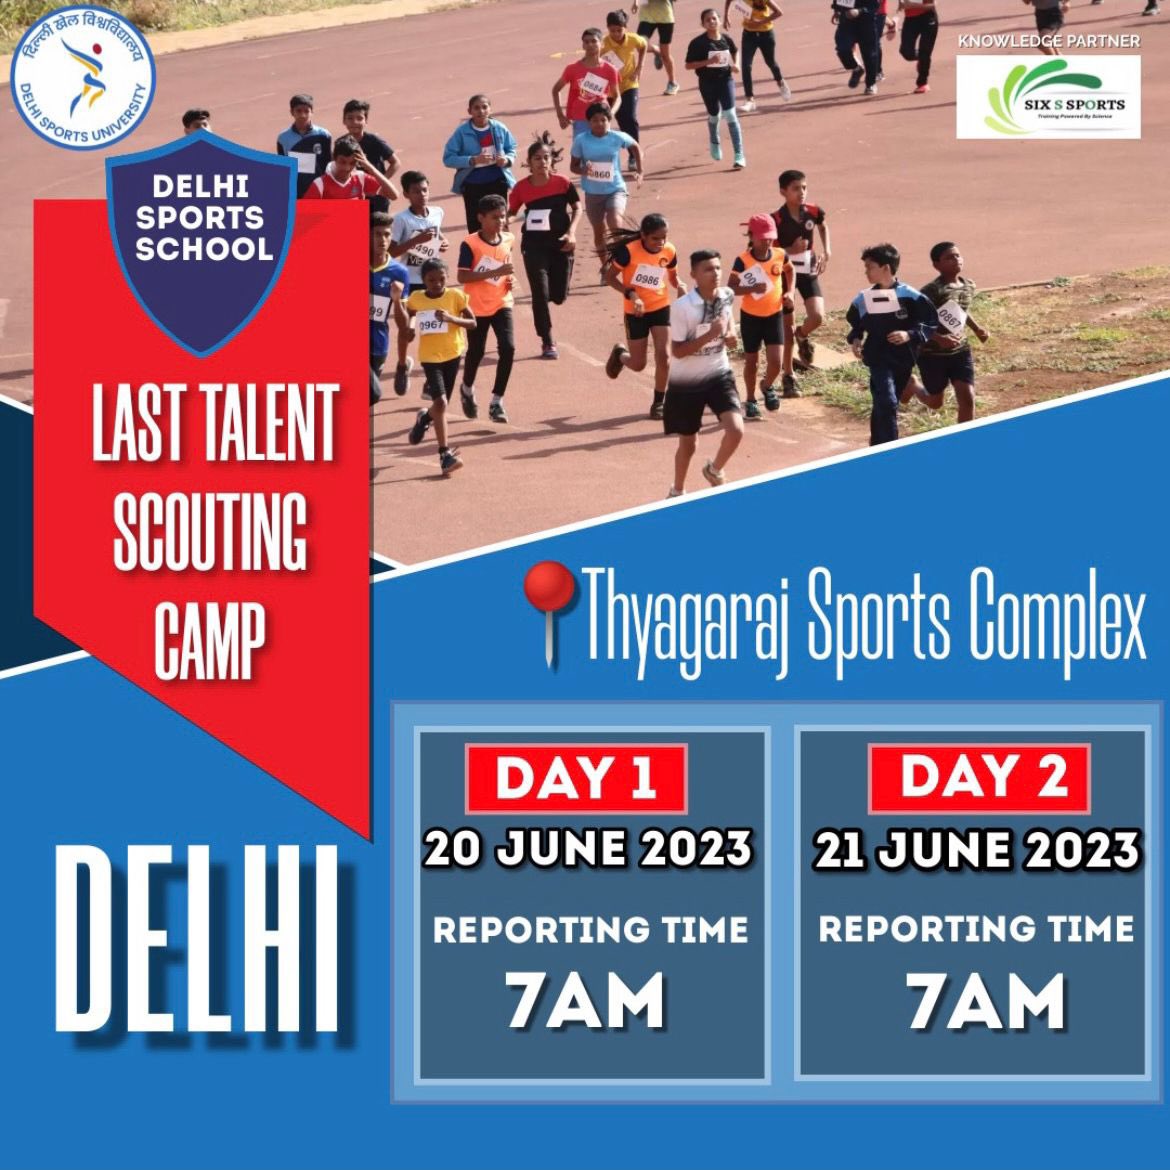 Don't miss out on this last chance to showcase your skills and grab your seat in the first Delhi Sports School!🏫 On spot registrations will be open till 12 noon on both days. 🏆🥇. *Kindly note that Round 1 results and details of Round 2 will be declared after the delhi camp.